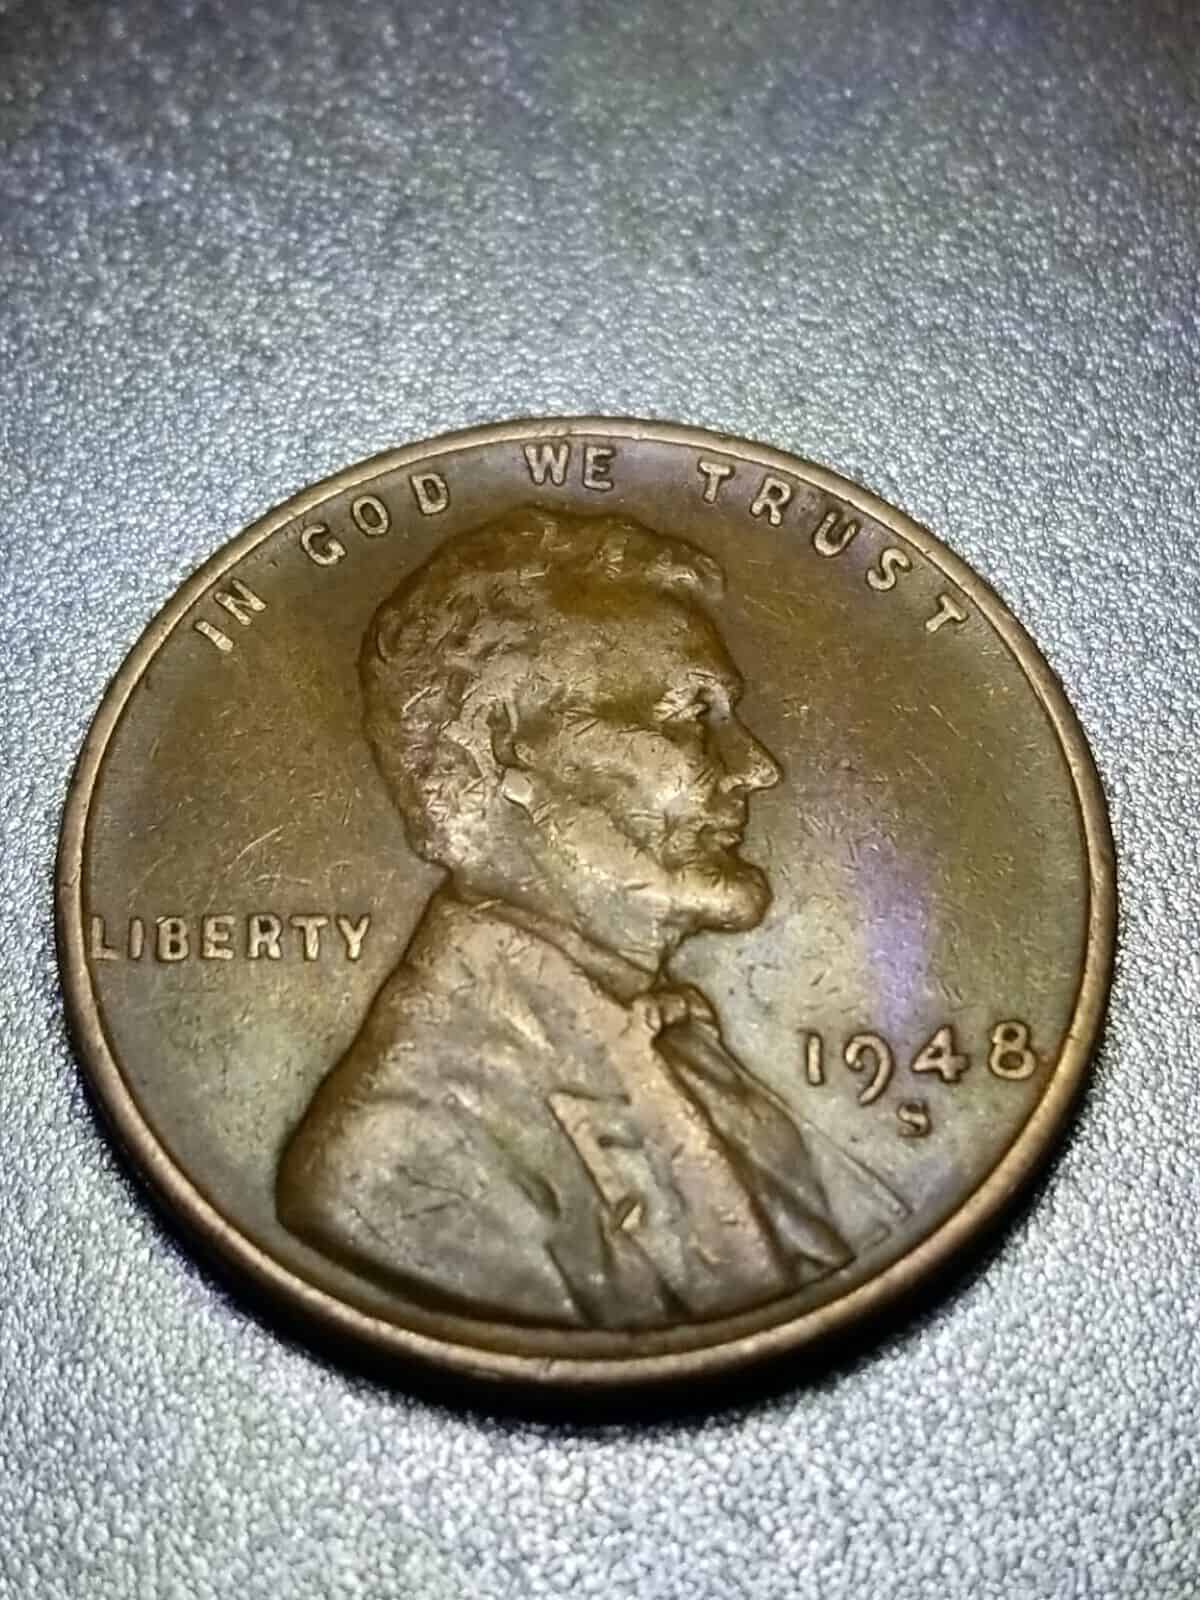 1948 Wheat Penny Doubled Die Error